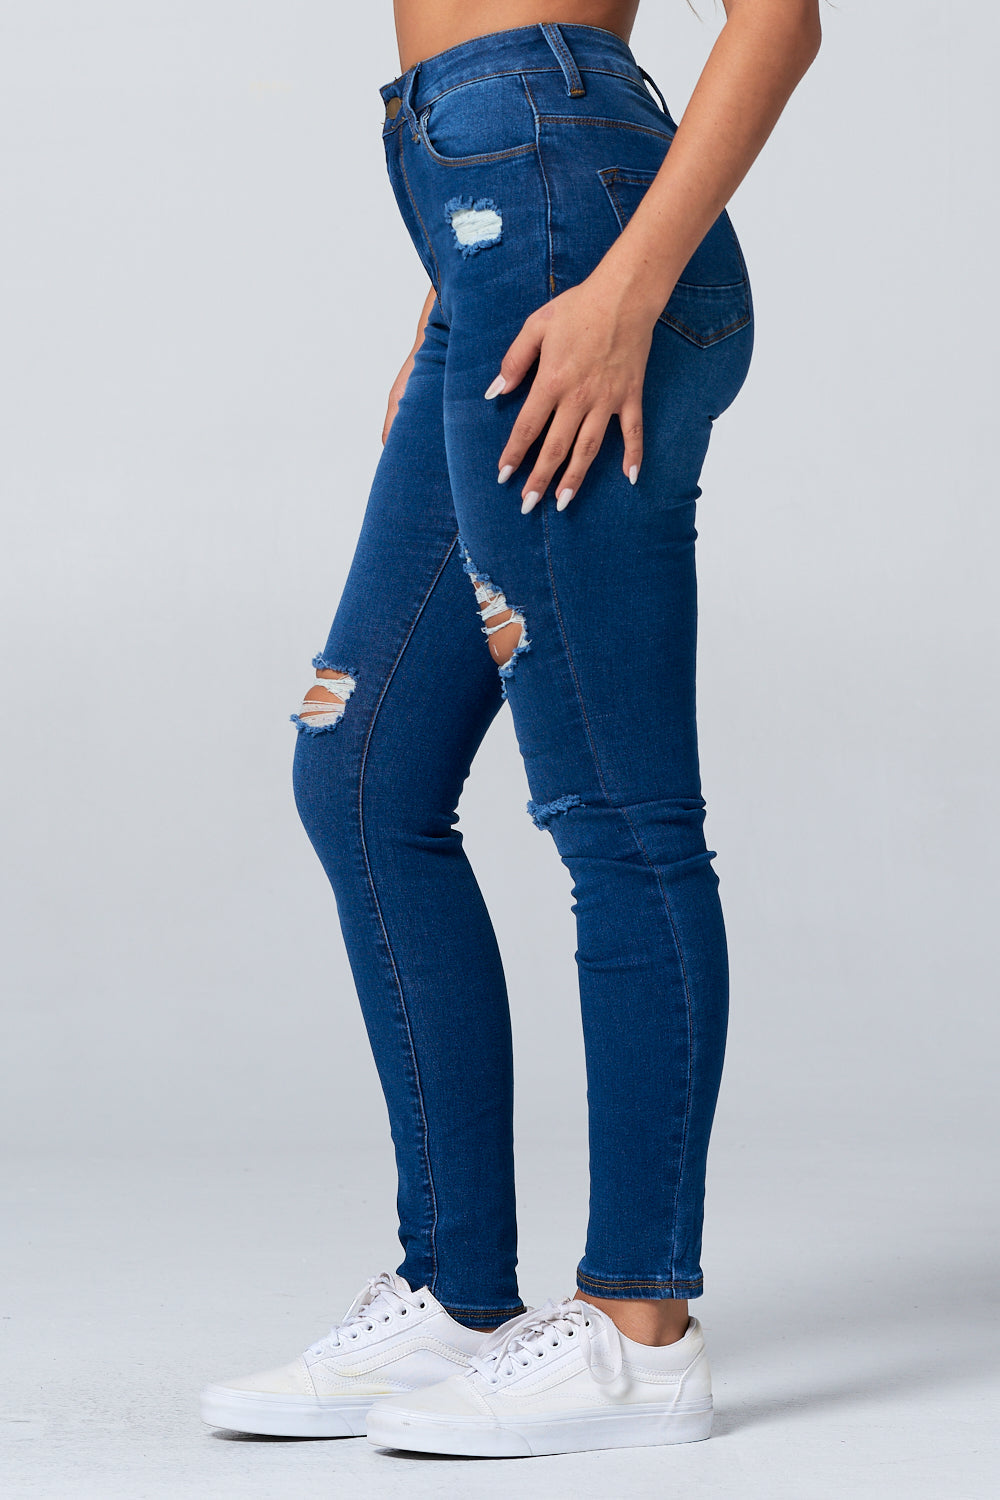 NEW Ripped High Rise Skinny Jean Light Blue DH3709